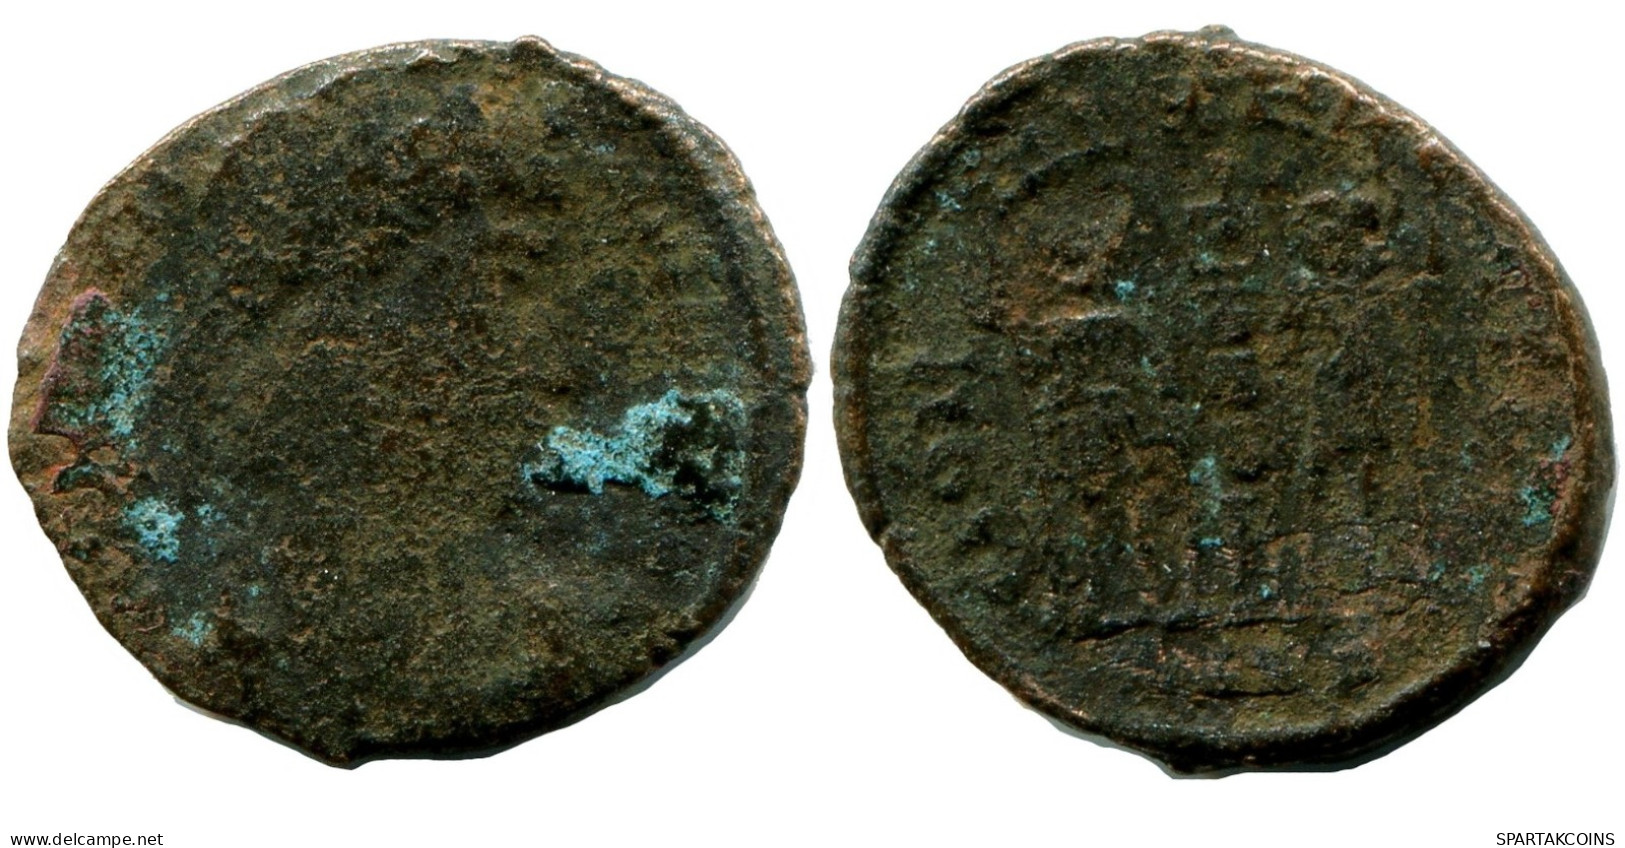 ROMAN Coin MINTED IN CYZICUS FROM THE ROYAL ONTARIO MUSEUM #ANC11042.14.D.A - El Imperio Christiano (307 / 363)